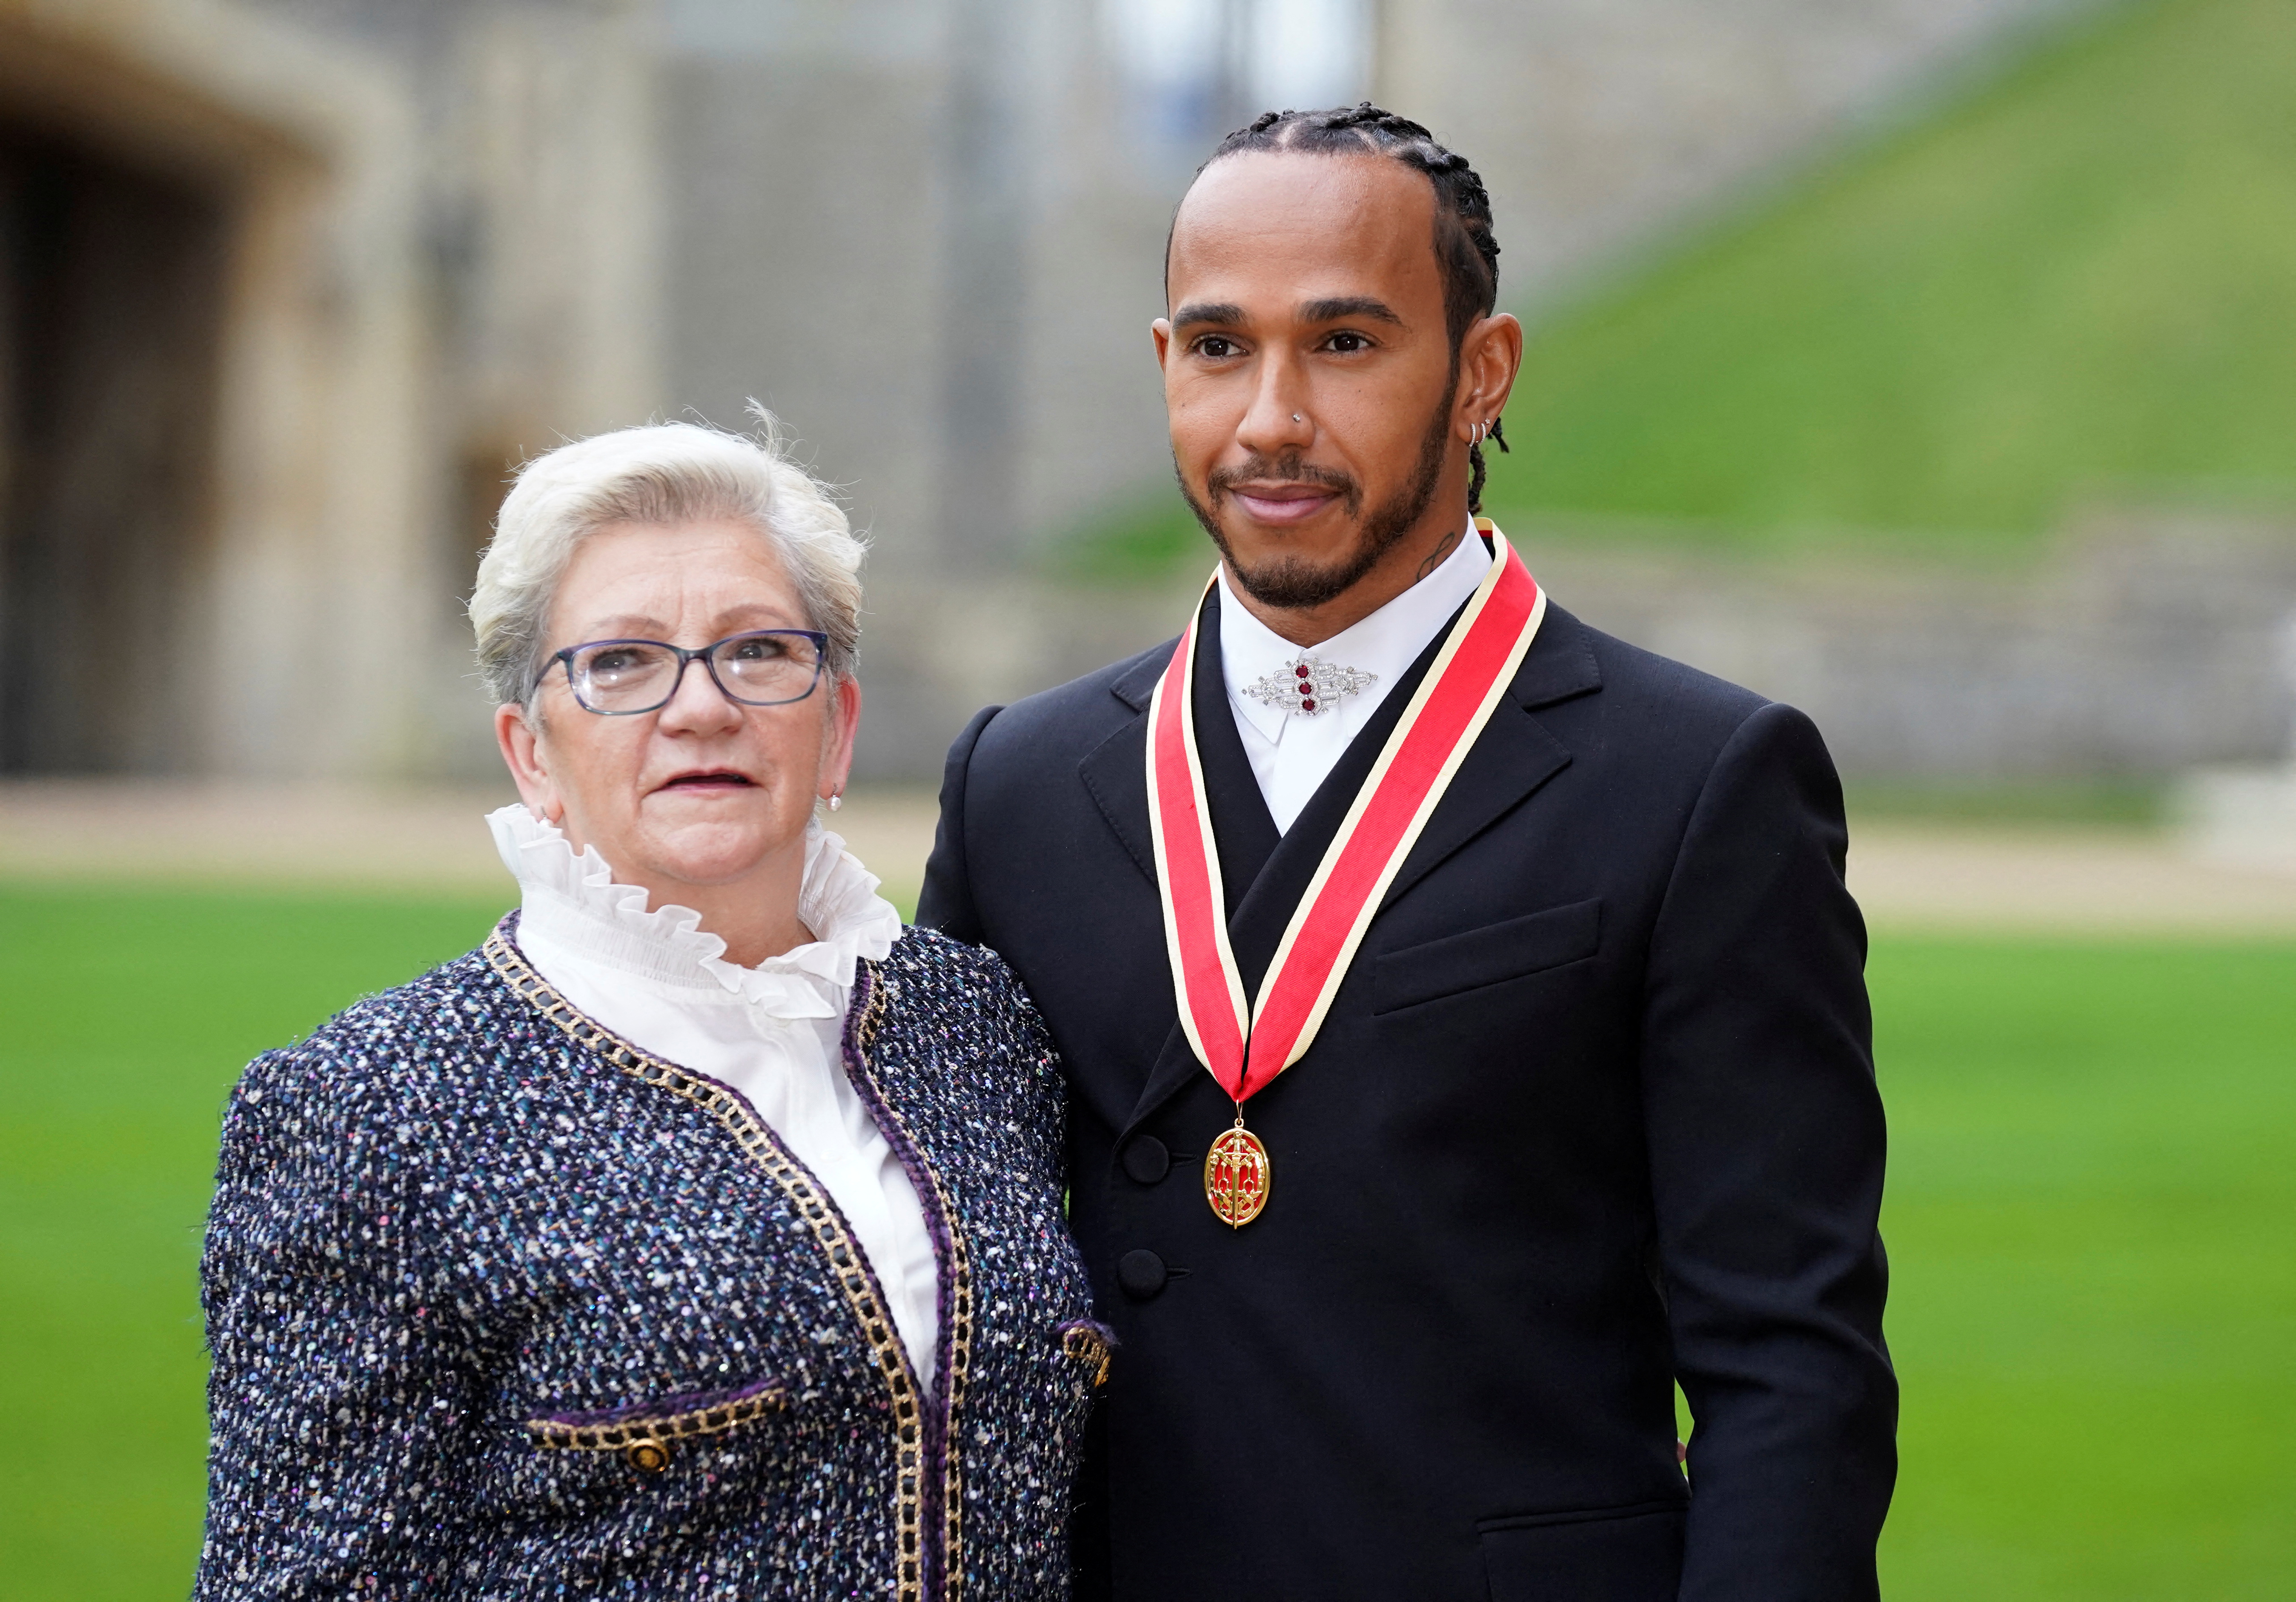 Lewis Hamilton poses with his mother Carmen Lockhart for a photo after he was made a Knight Bachelor by Britain's Charles, Prince of Wales, during an investiture ceremony at Windsor Castle in Windsor, Britain, December 15, 2021. Andrew Matthews/Pool via REUTERS